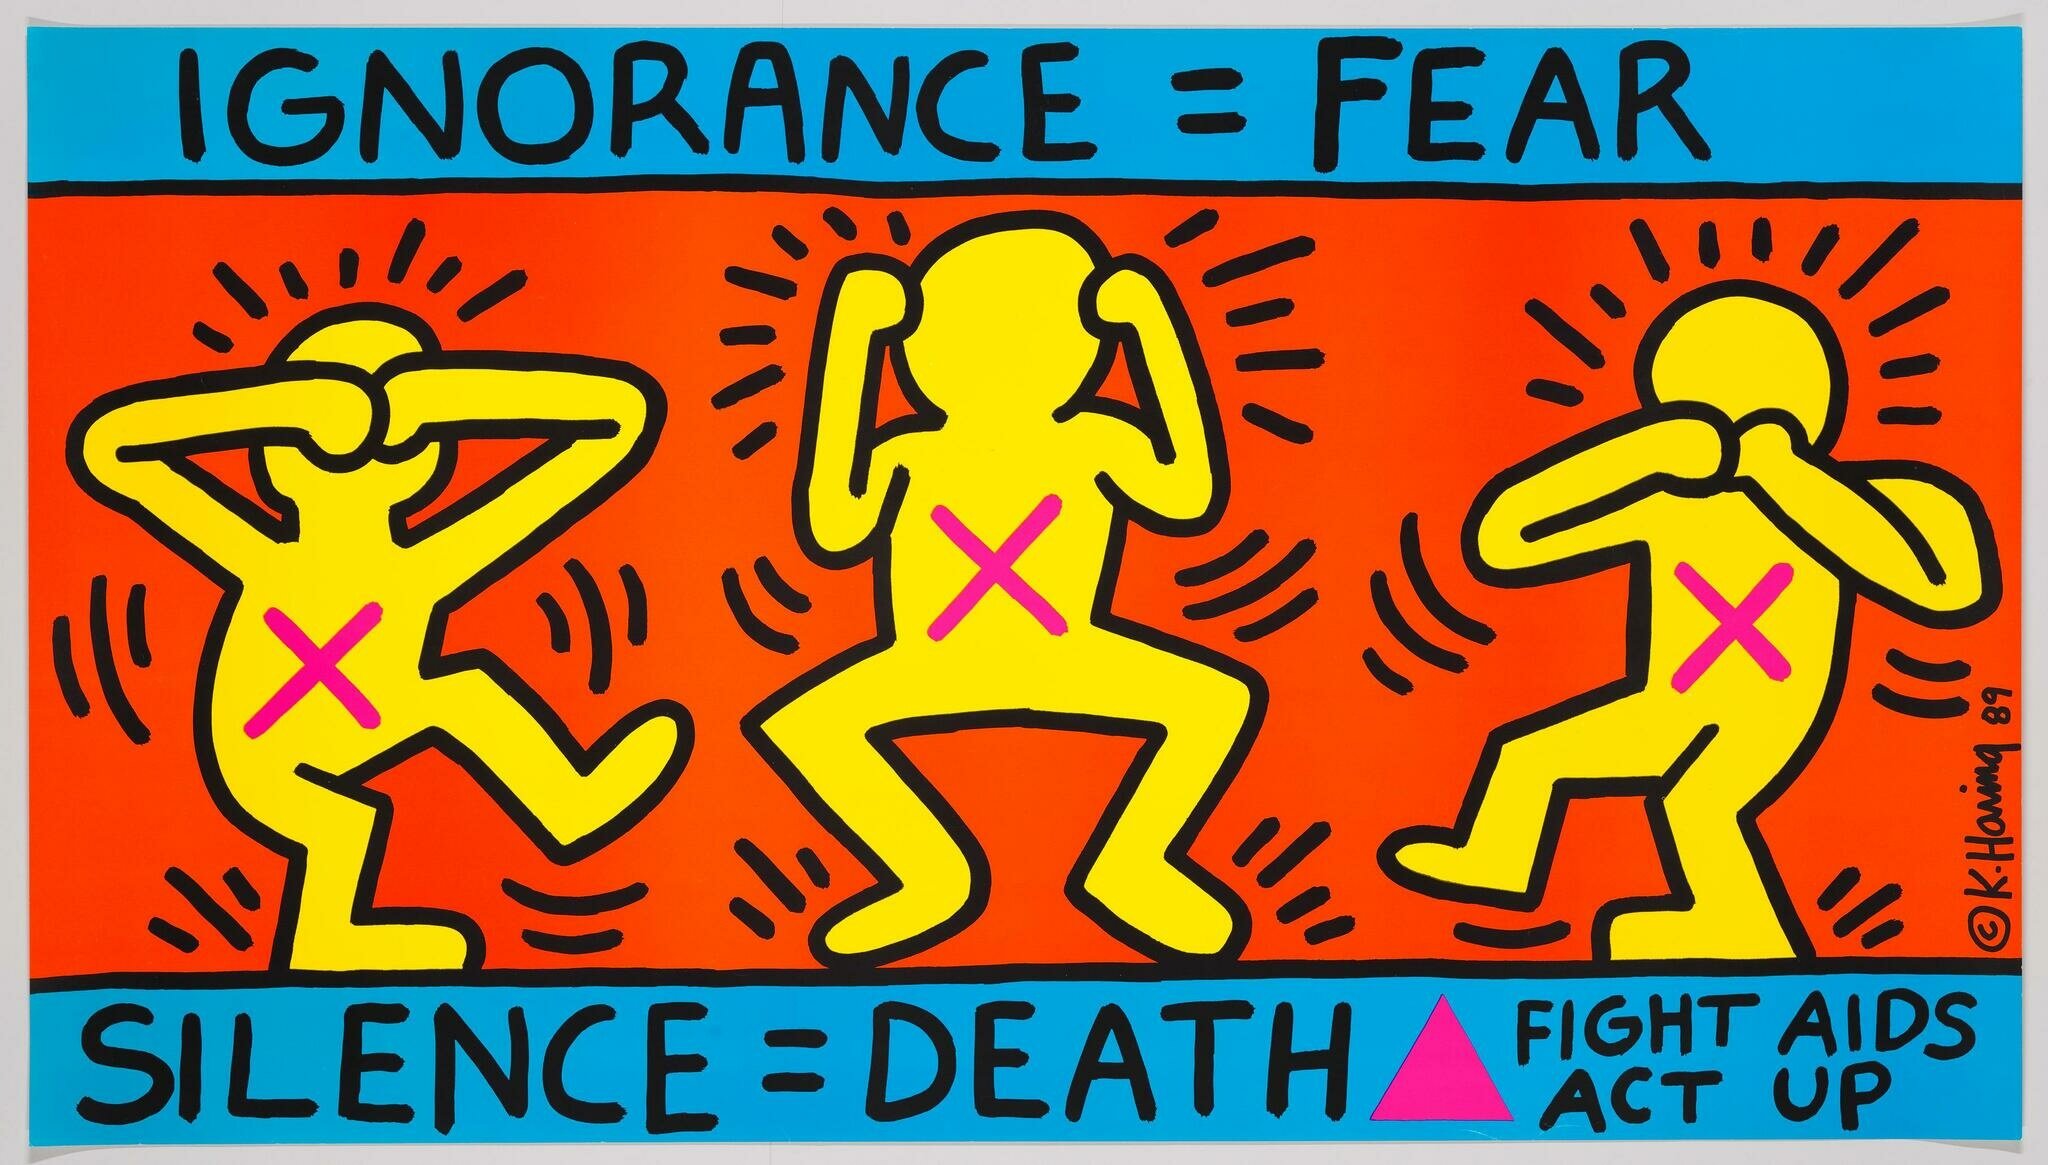 Keith Haring talking about the AIDS Pandemic. 1987